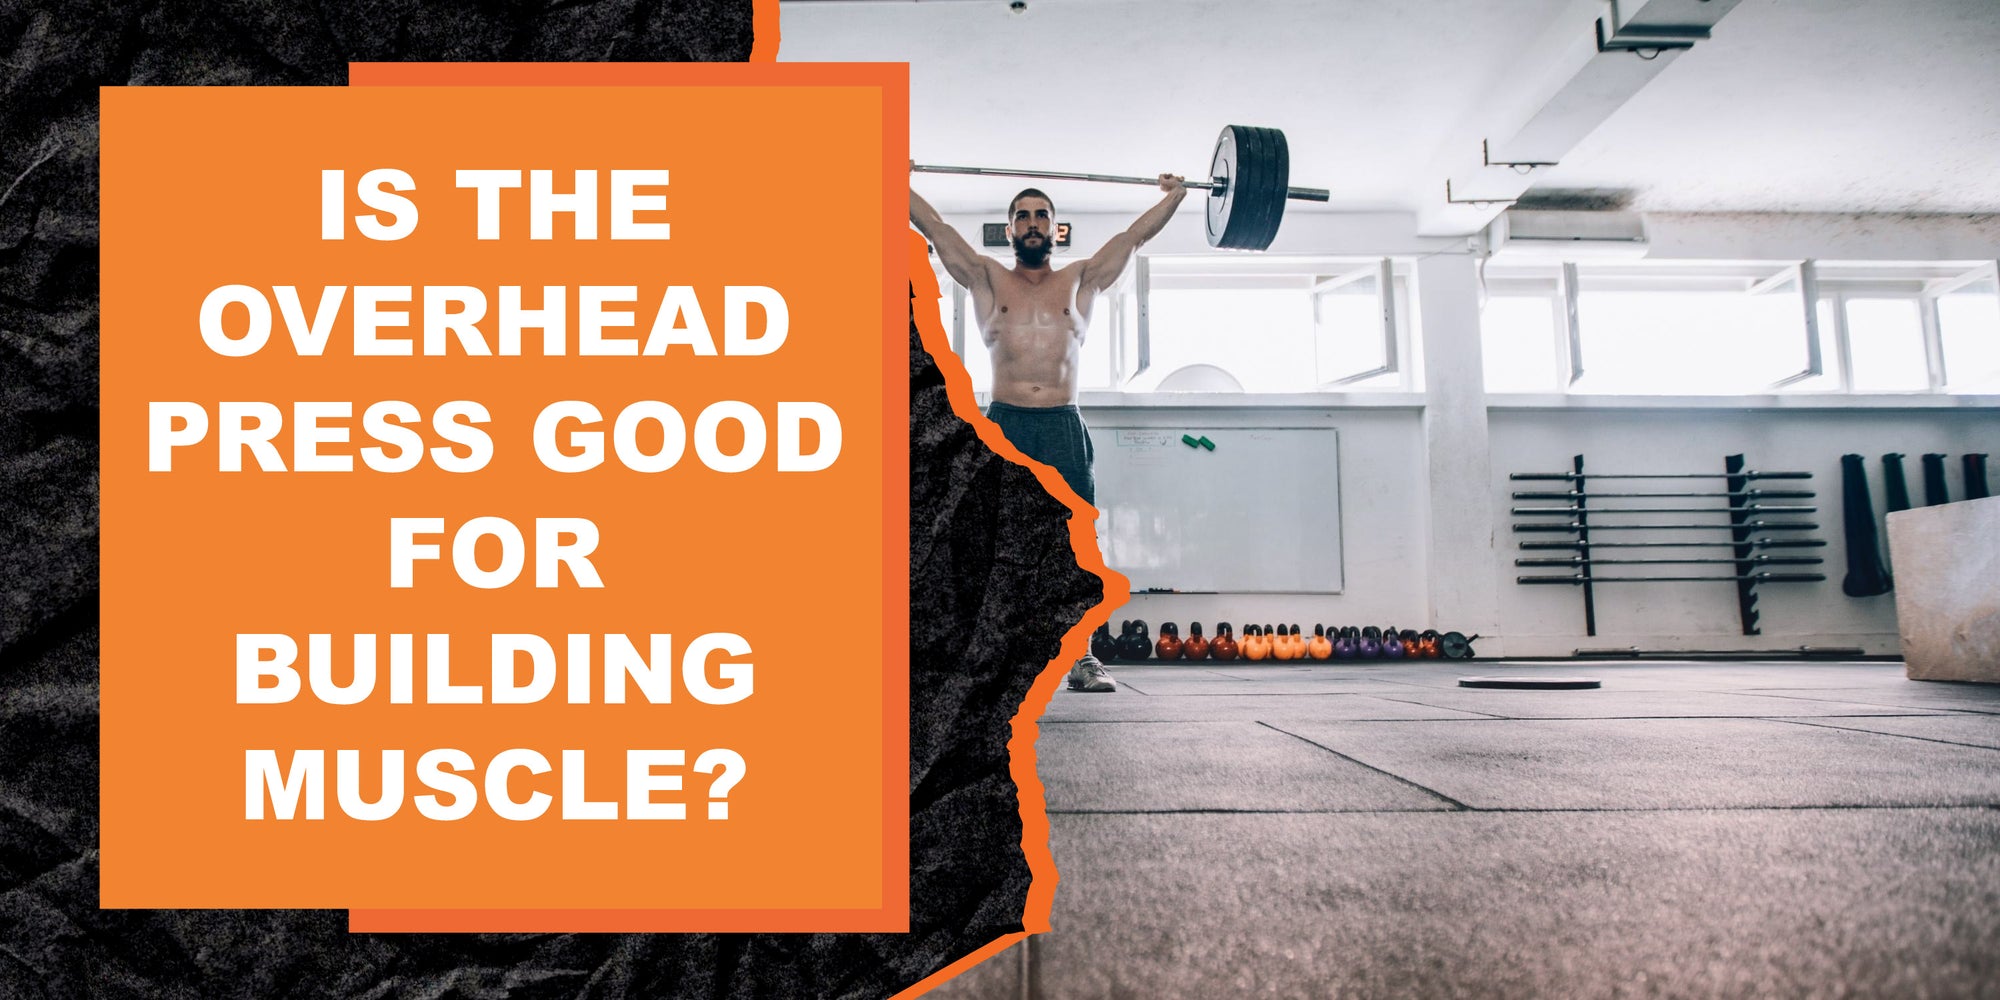 Is the Overhead Press Good for Building Muscle?